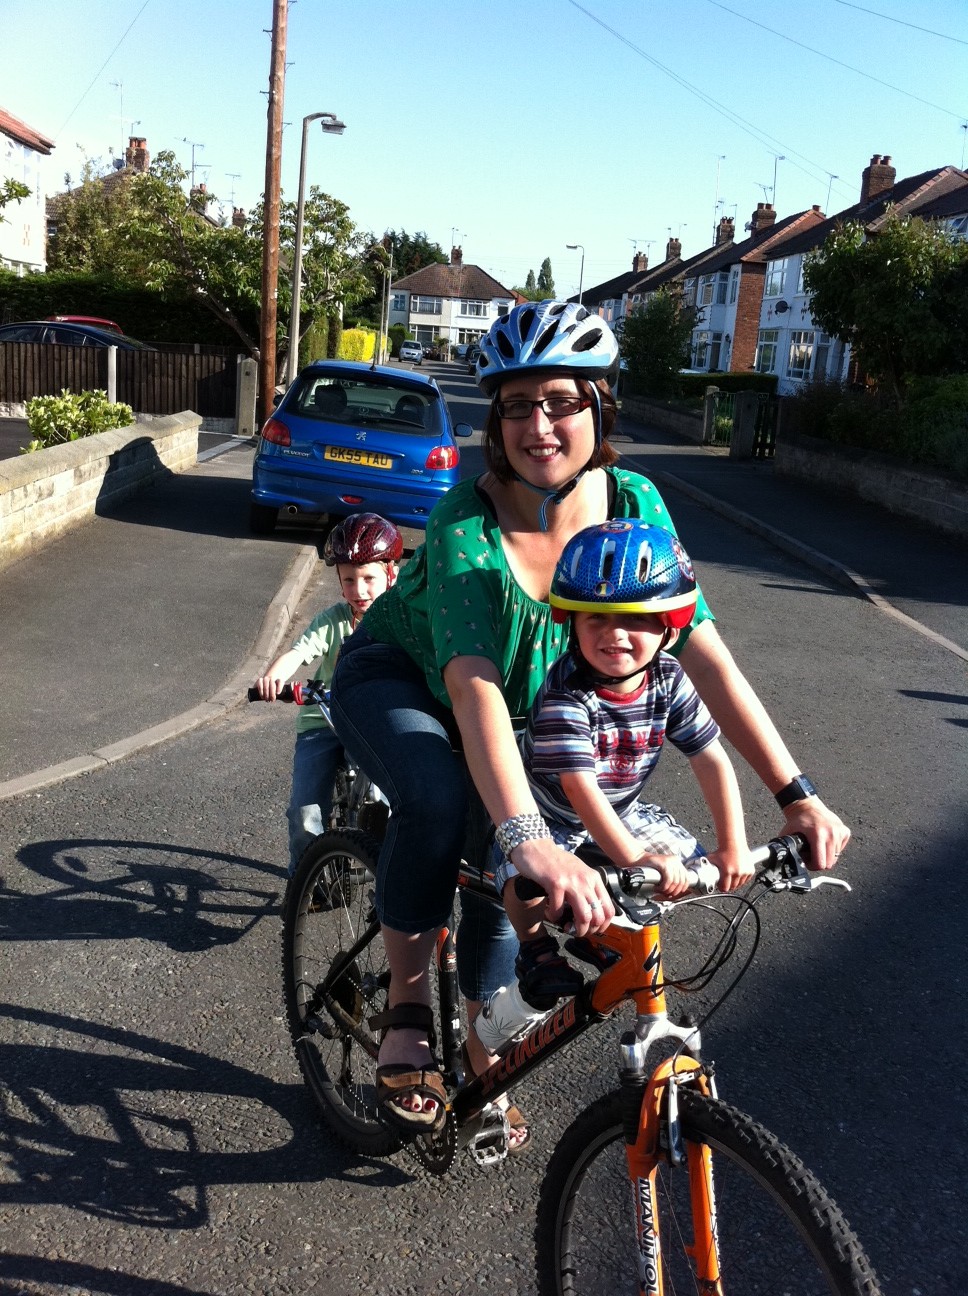 Your cycling changes when you become a parent - cycling 2 kids to school with tagalong and front seat